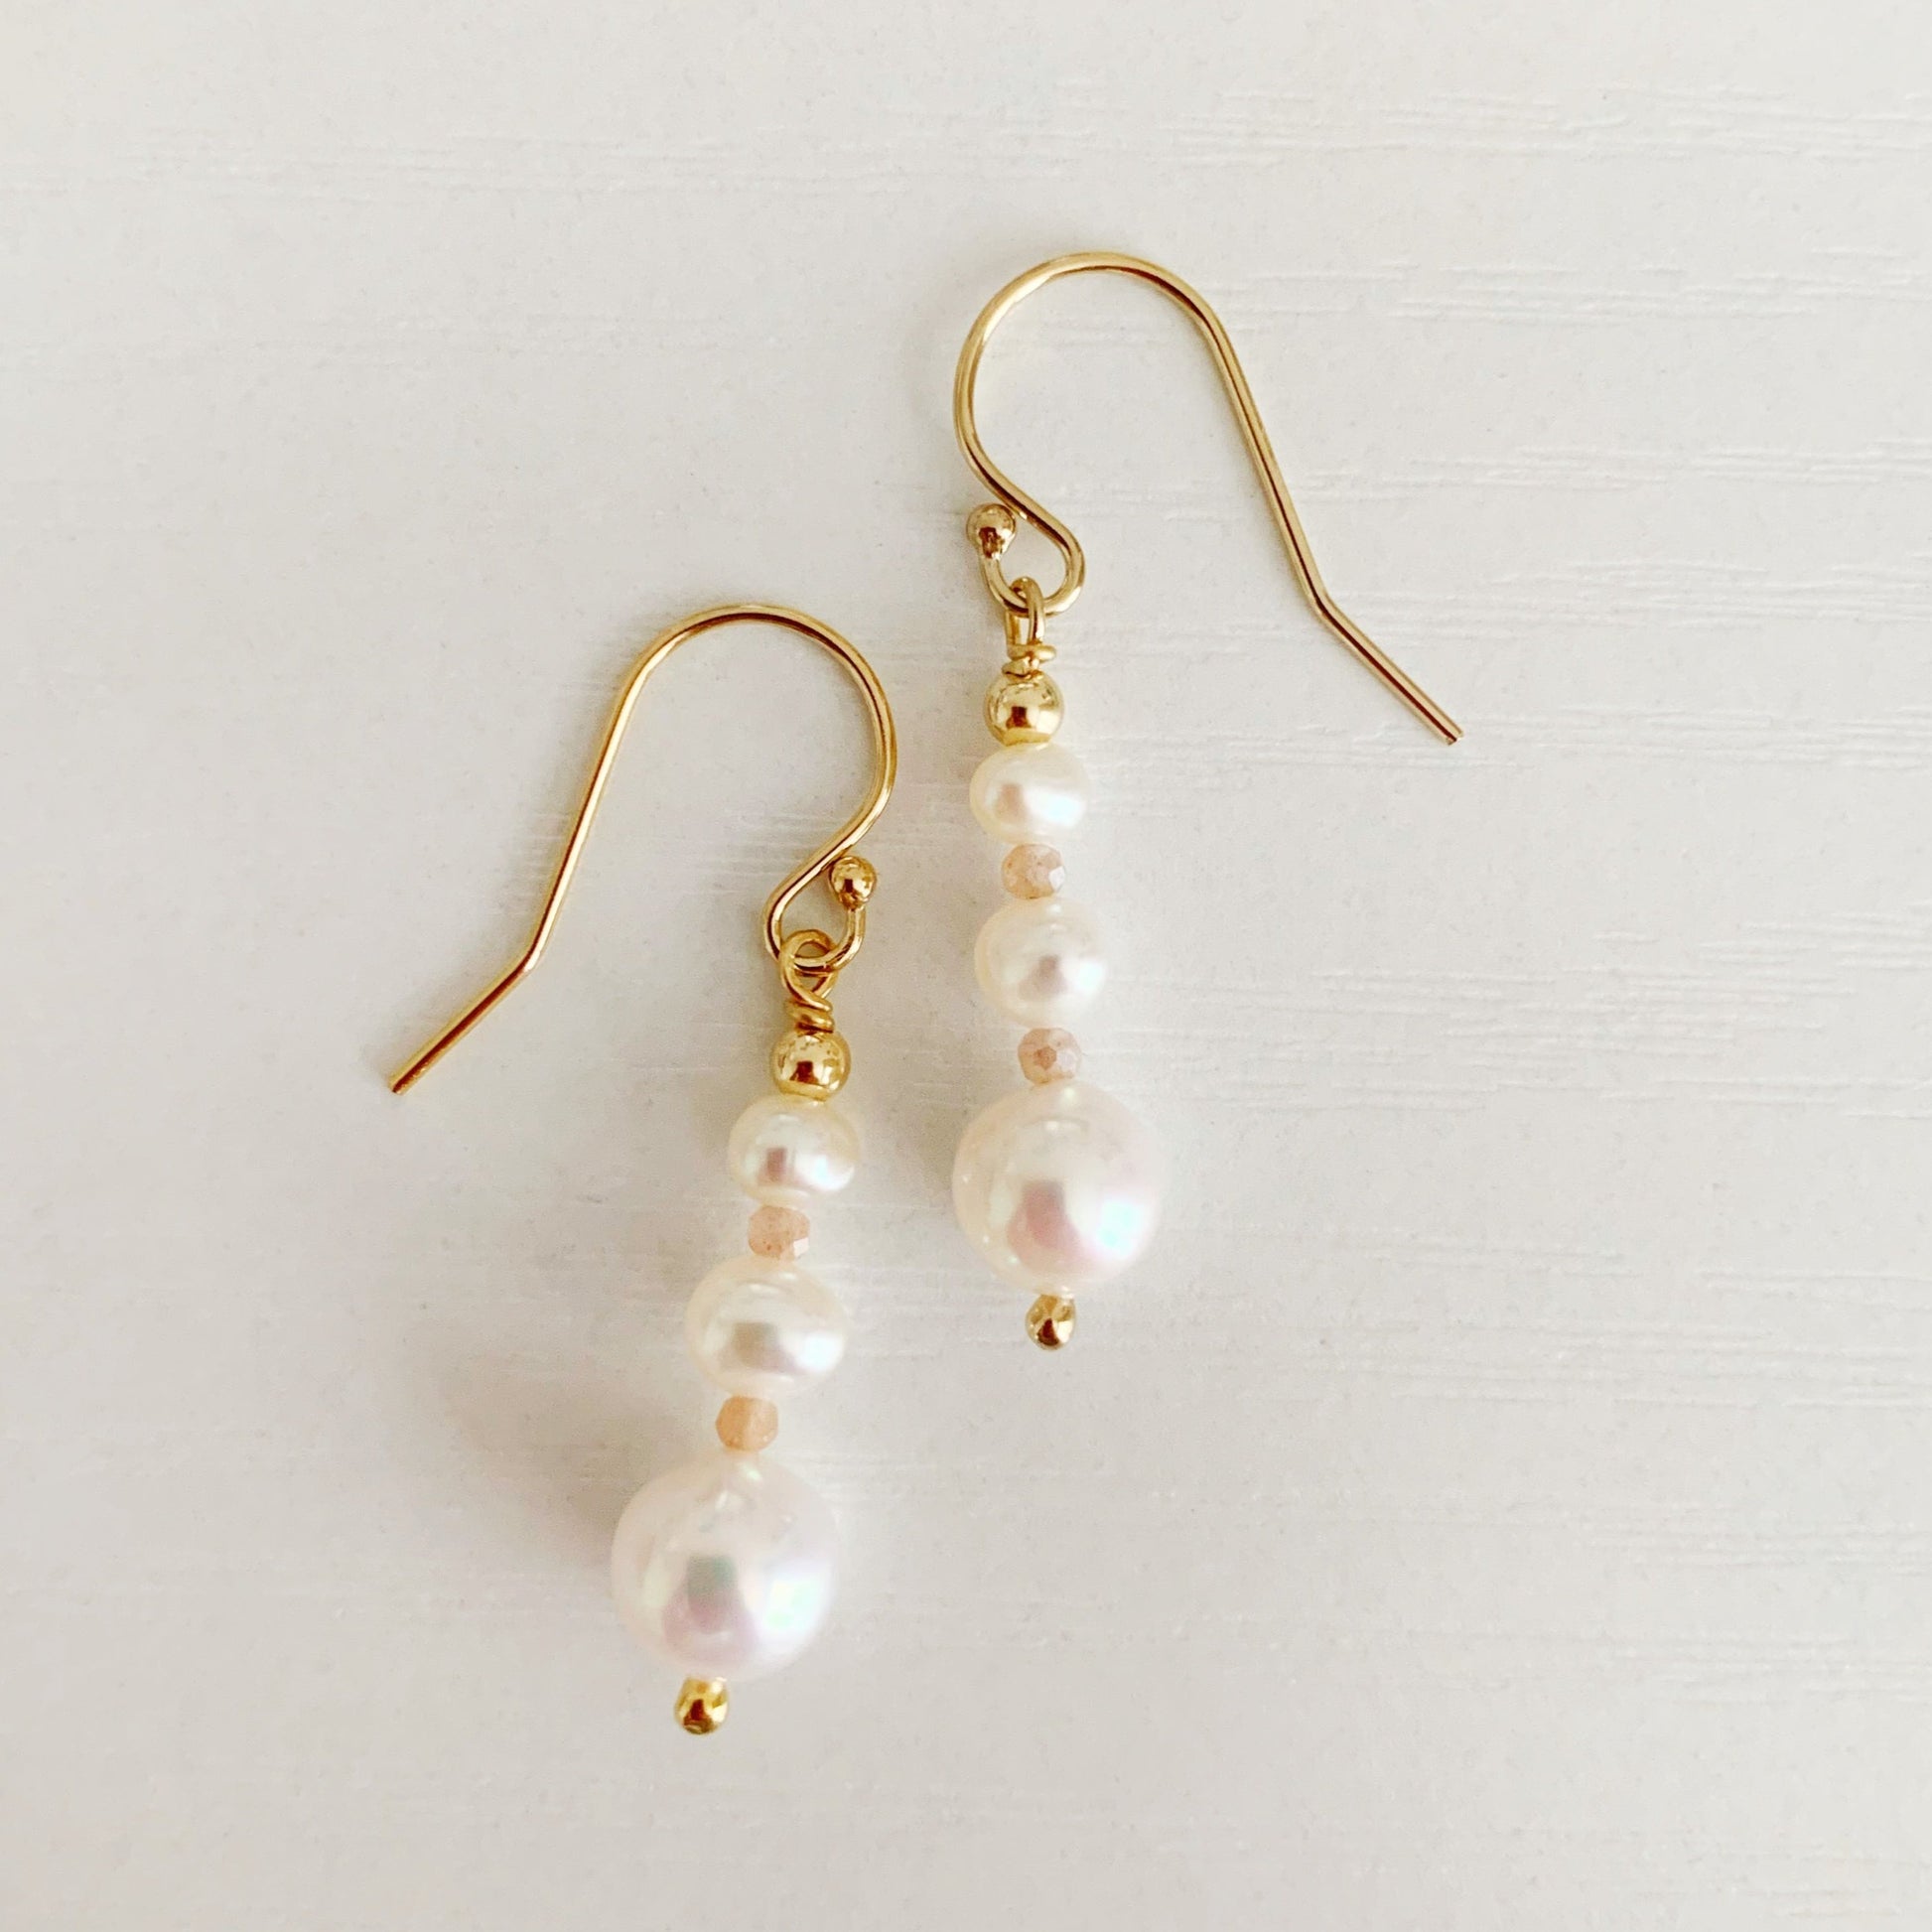 Barrington earrings by mermaids and madeleines feature freshwater pearls in a linear taper with peach moonstone accents and 14k gold filled findings. this pair is photographed flat on a white surface